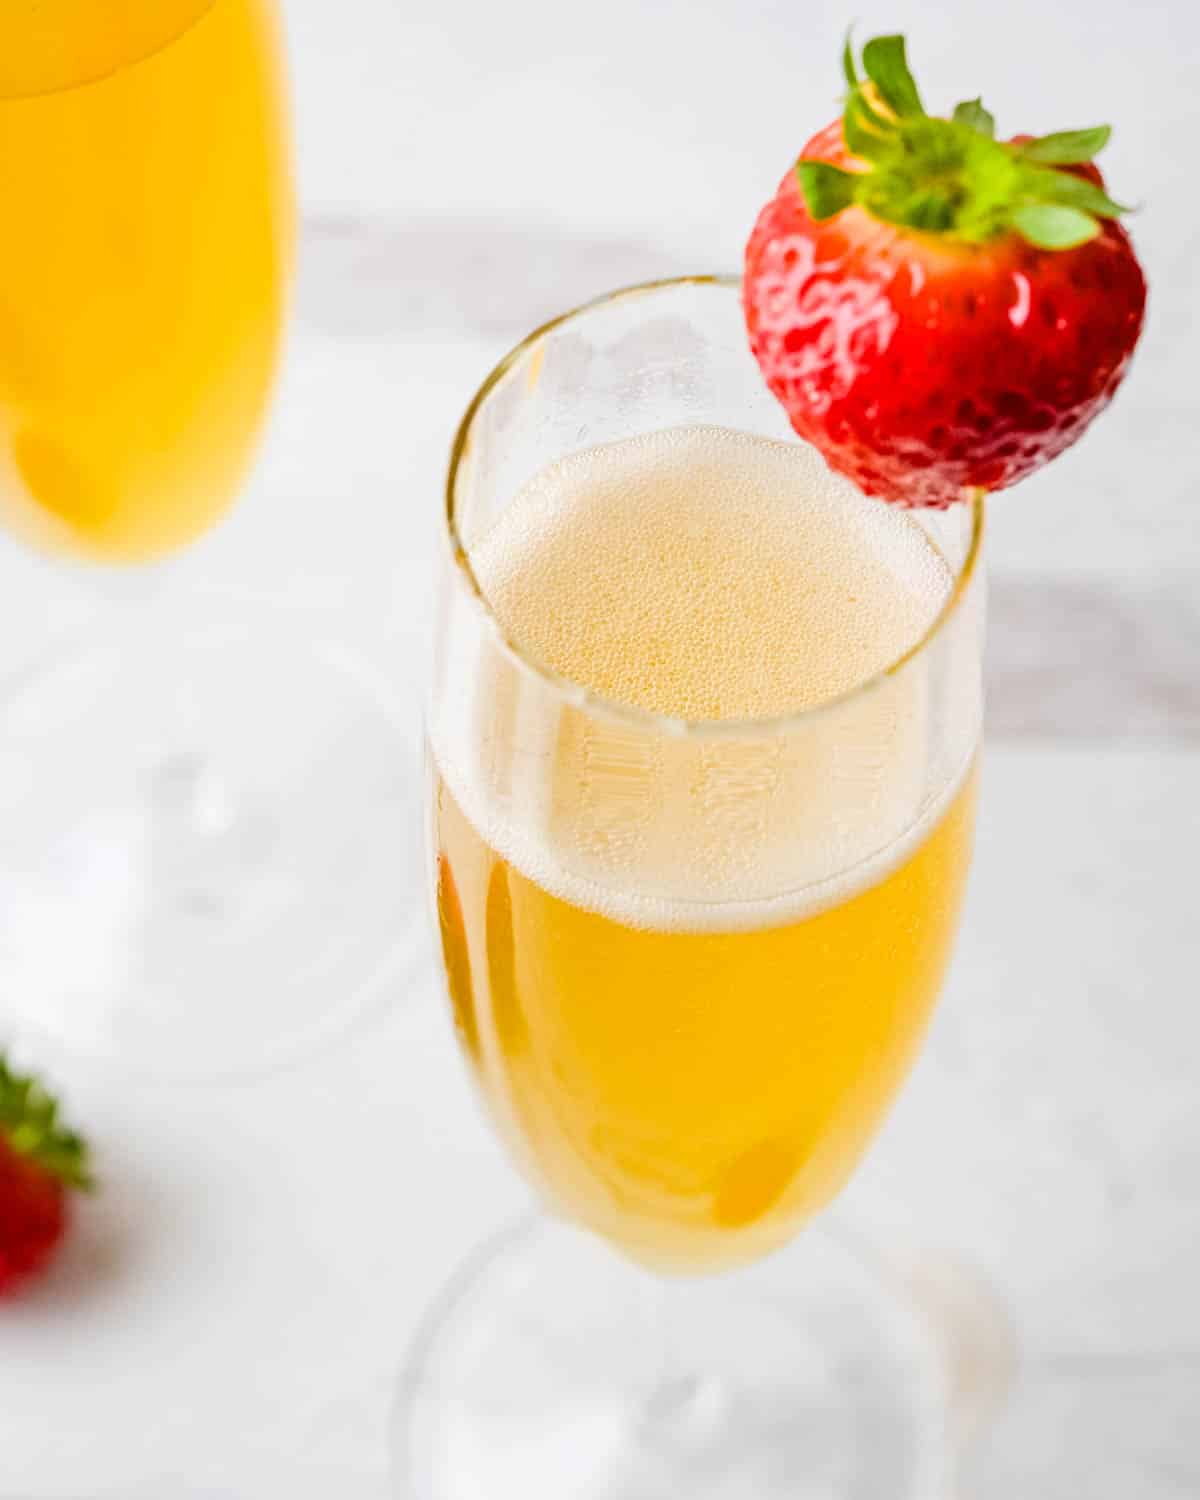 An elderflower and sparkling prosecco cocktail garnished with a strawberry.